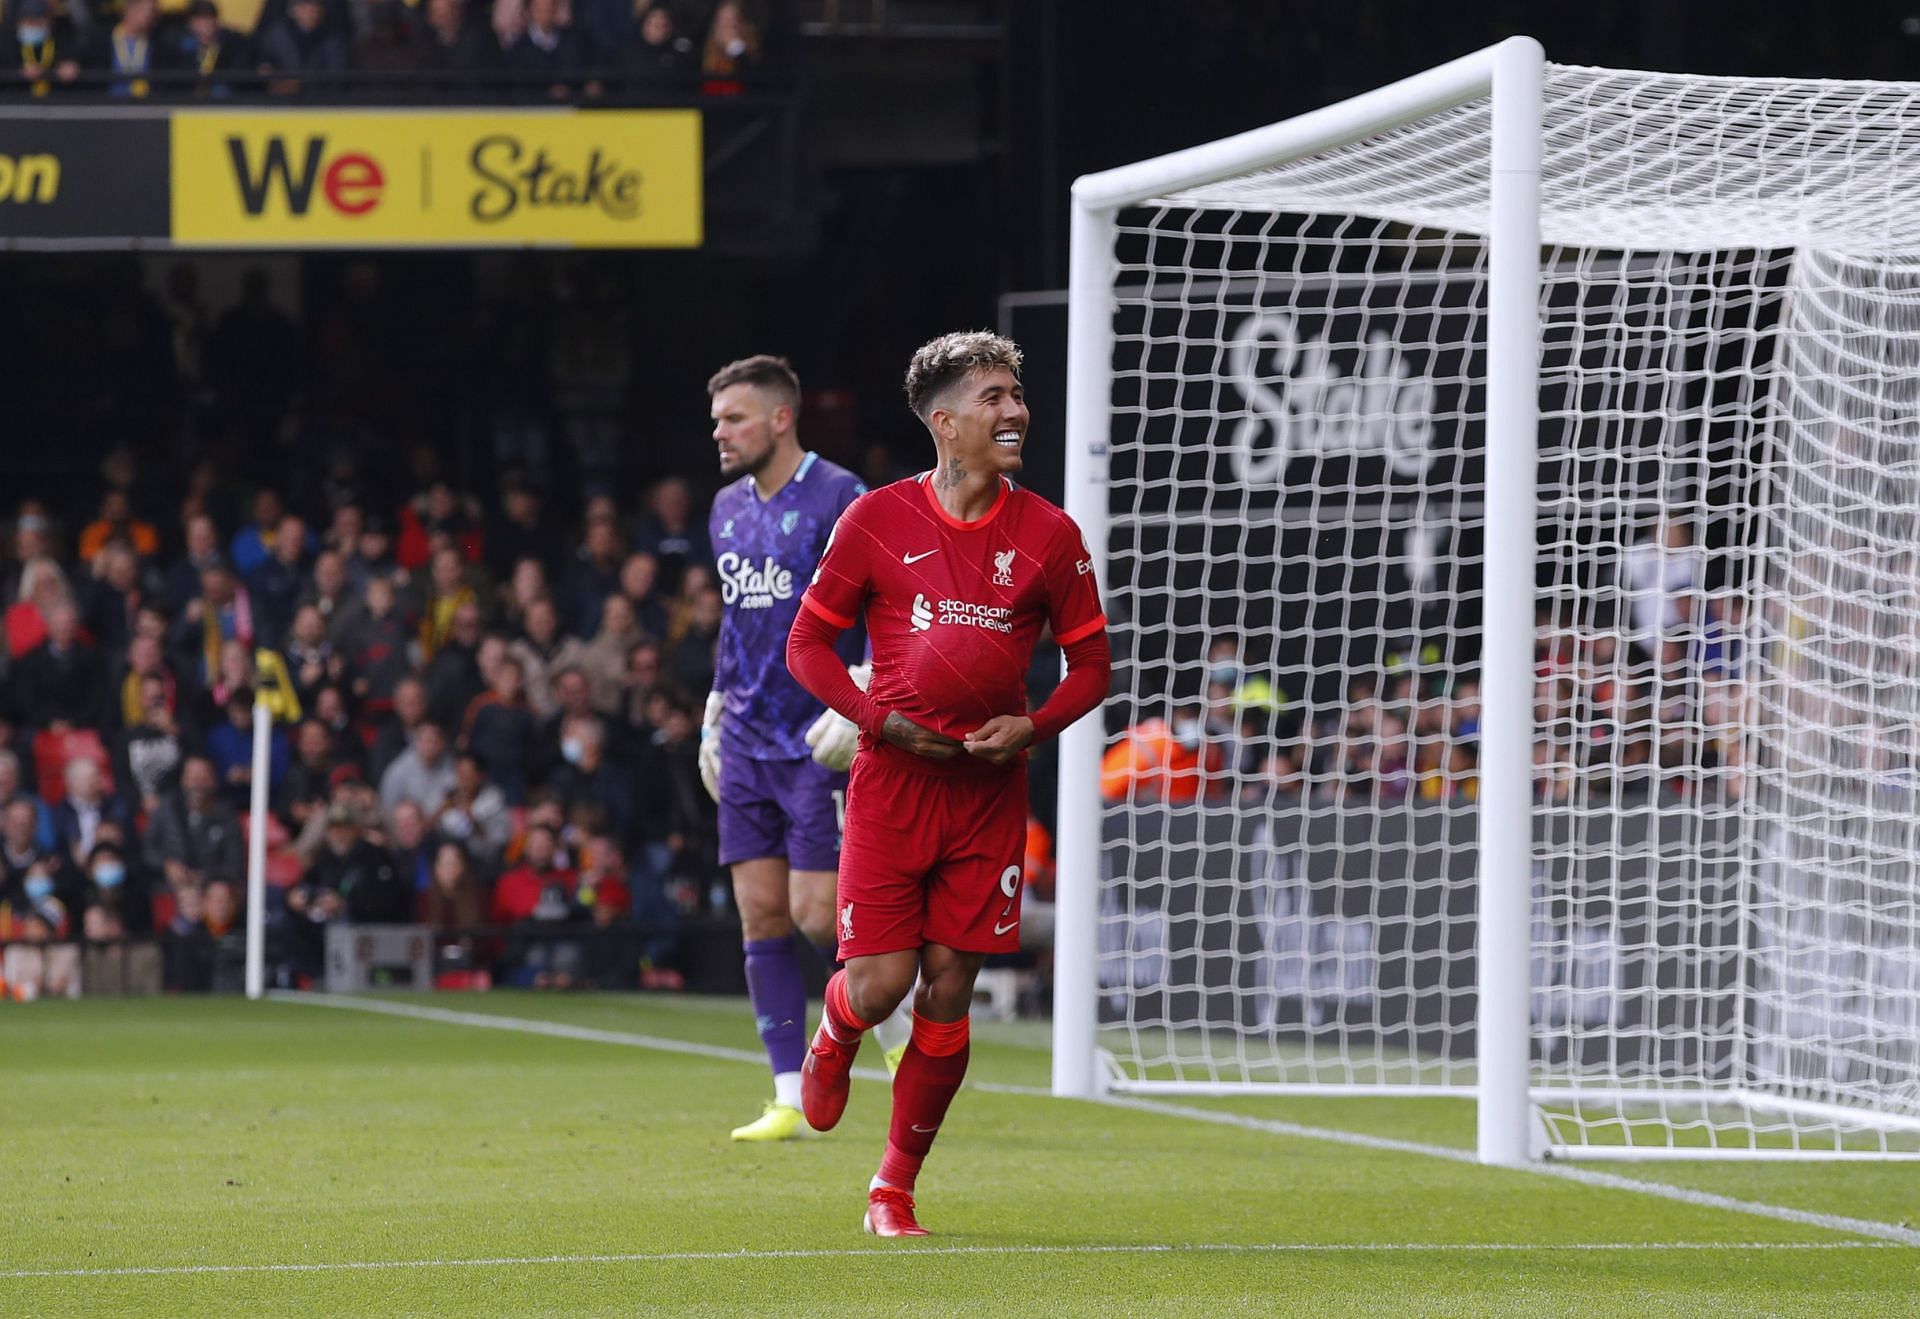 Firmino scored a hat-trick in the league for Liverpool after almost three years.